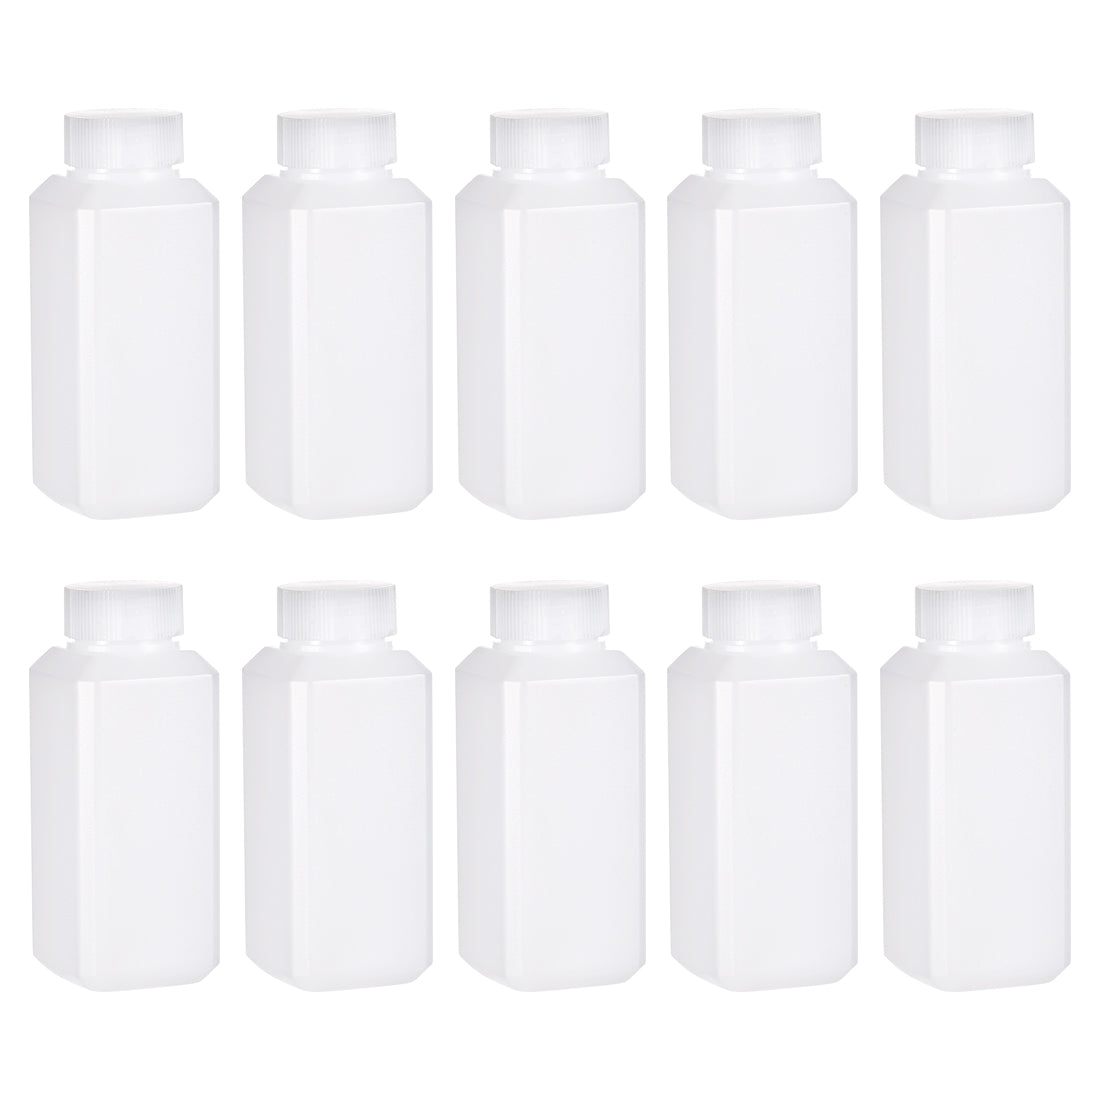 uxcell Uxcell Plastic Lab Chemical Reagent Bottle, 120ml/ 4oz Wide Mouth Sample Sealing Liquid/Solid Storage Bottles, White 10pcs